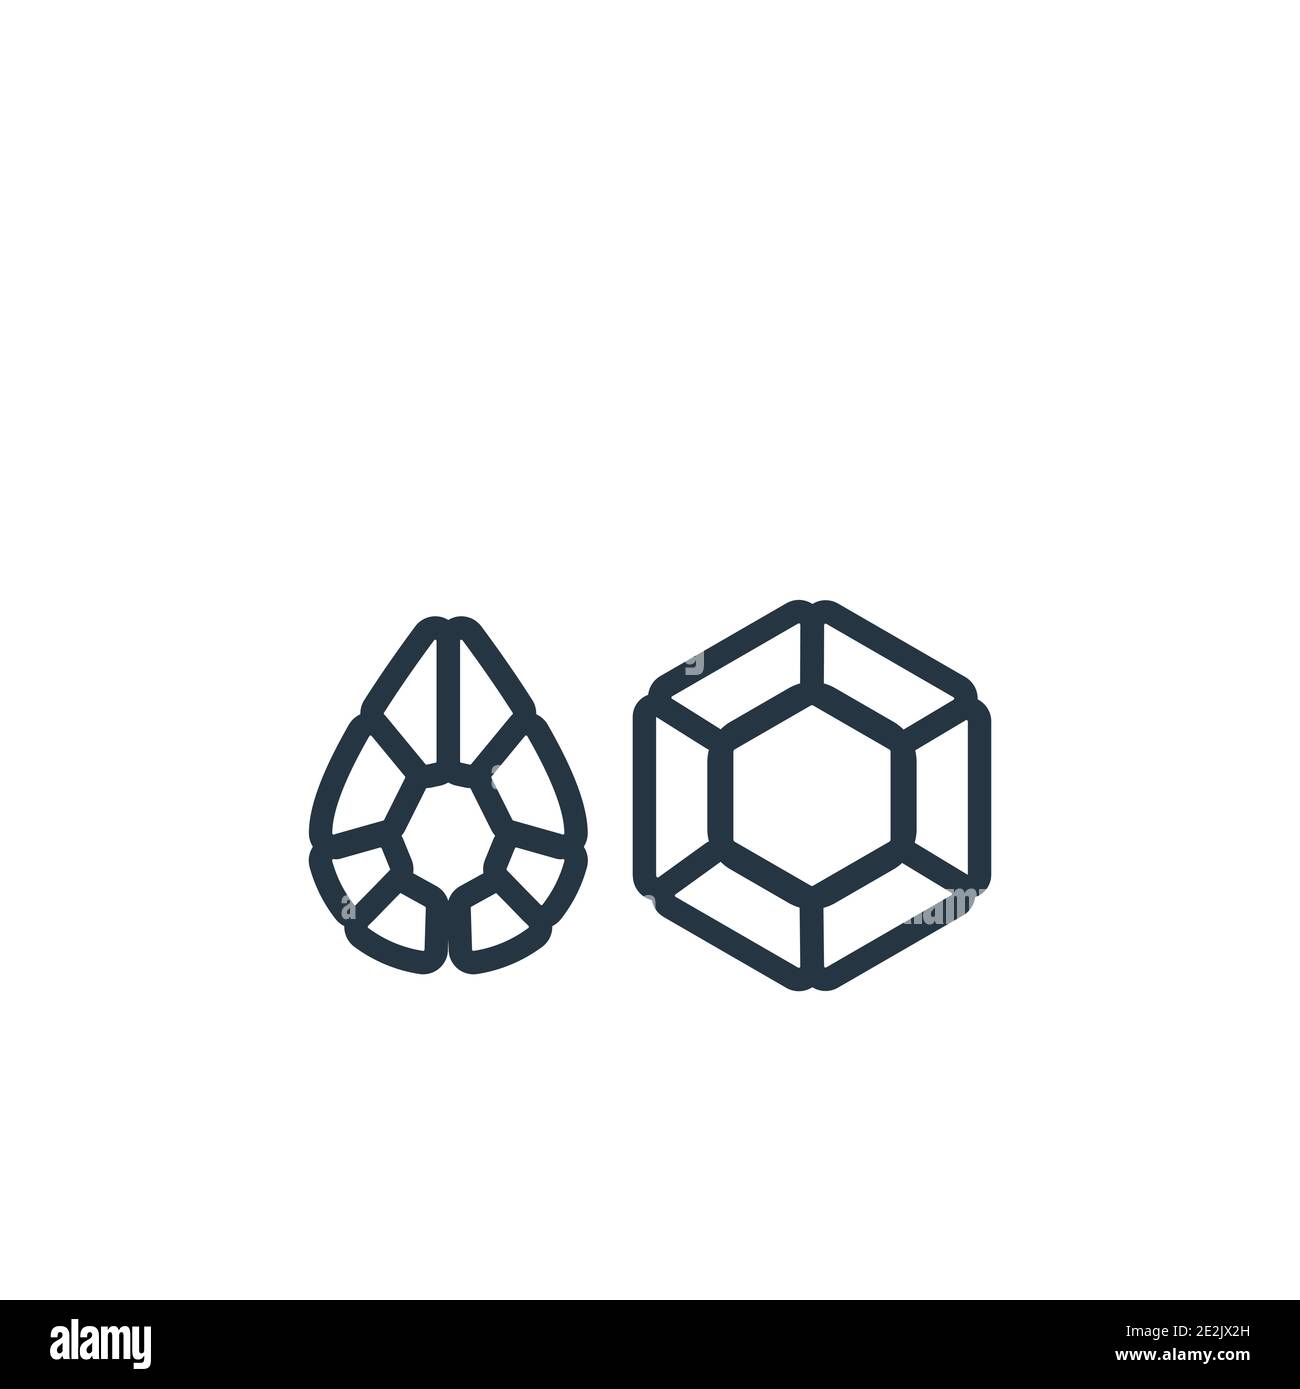 Gems outline vector icon. Thin line black gems icon, flat vector